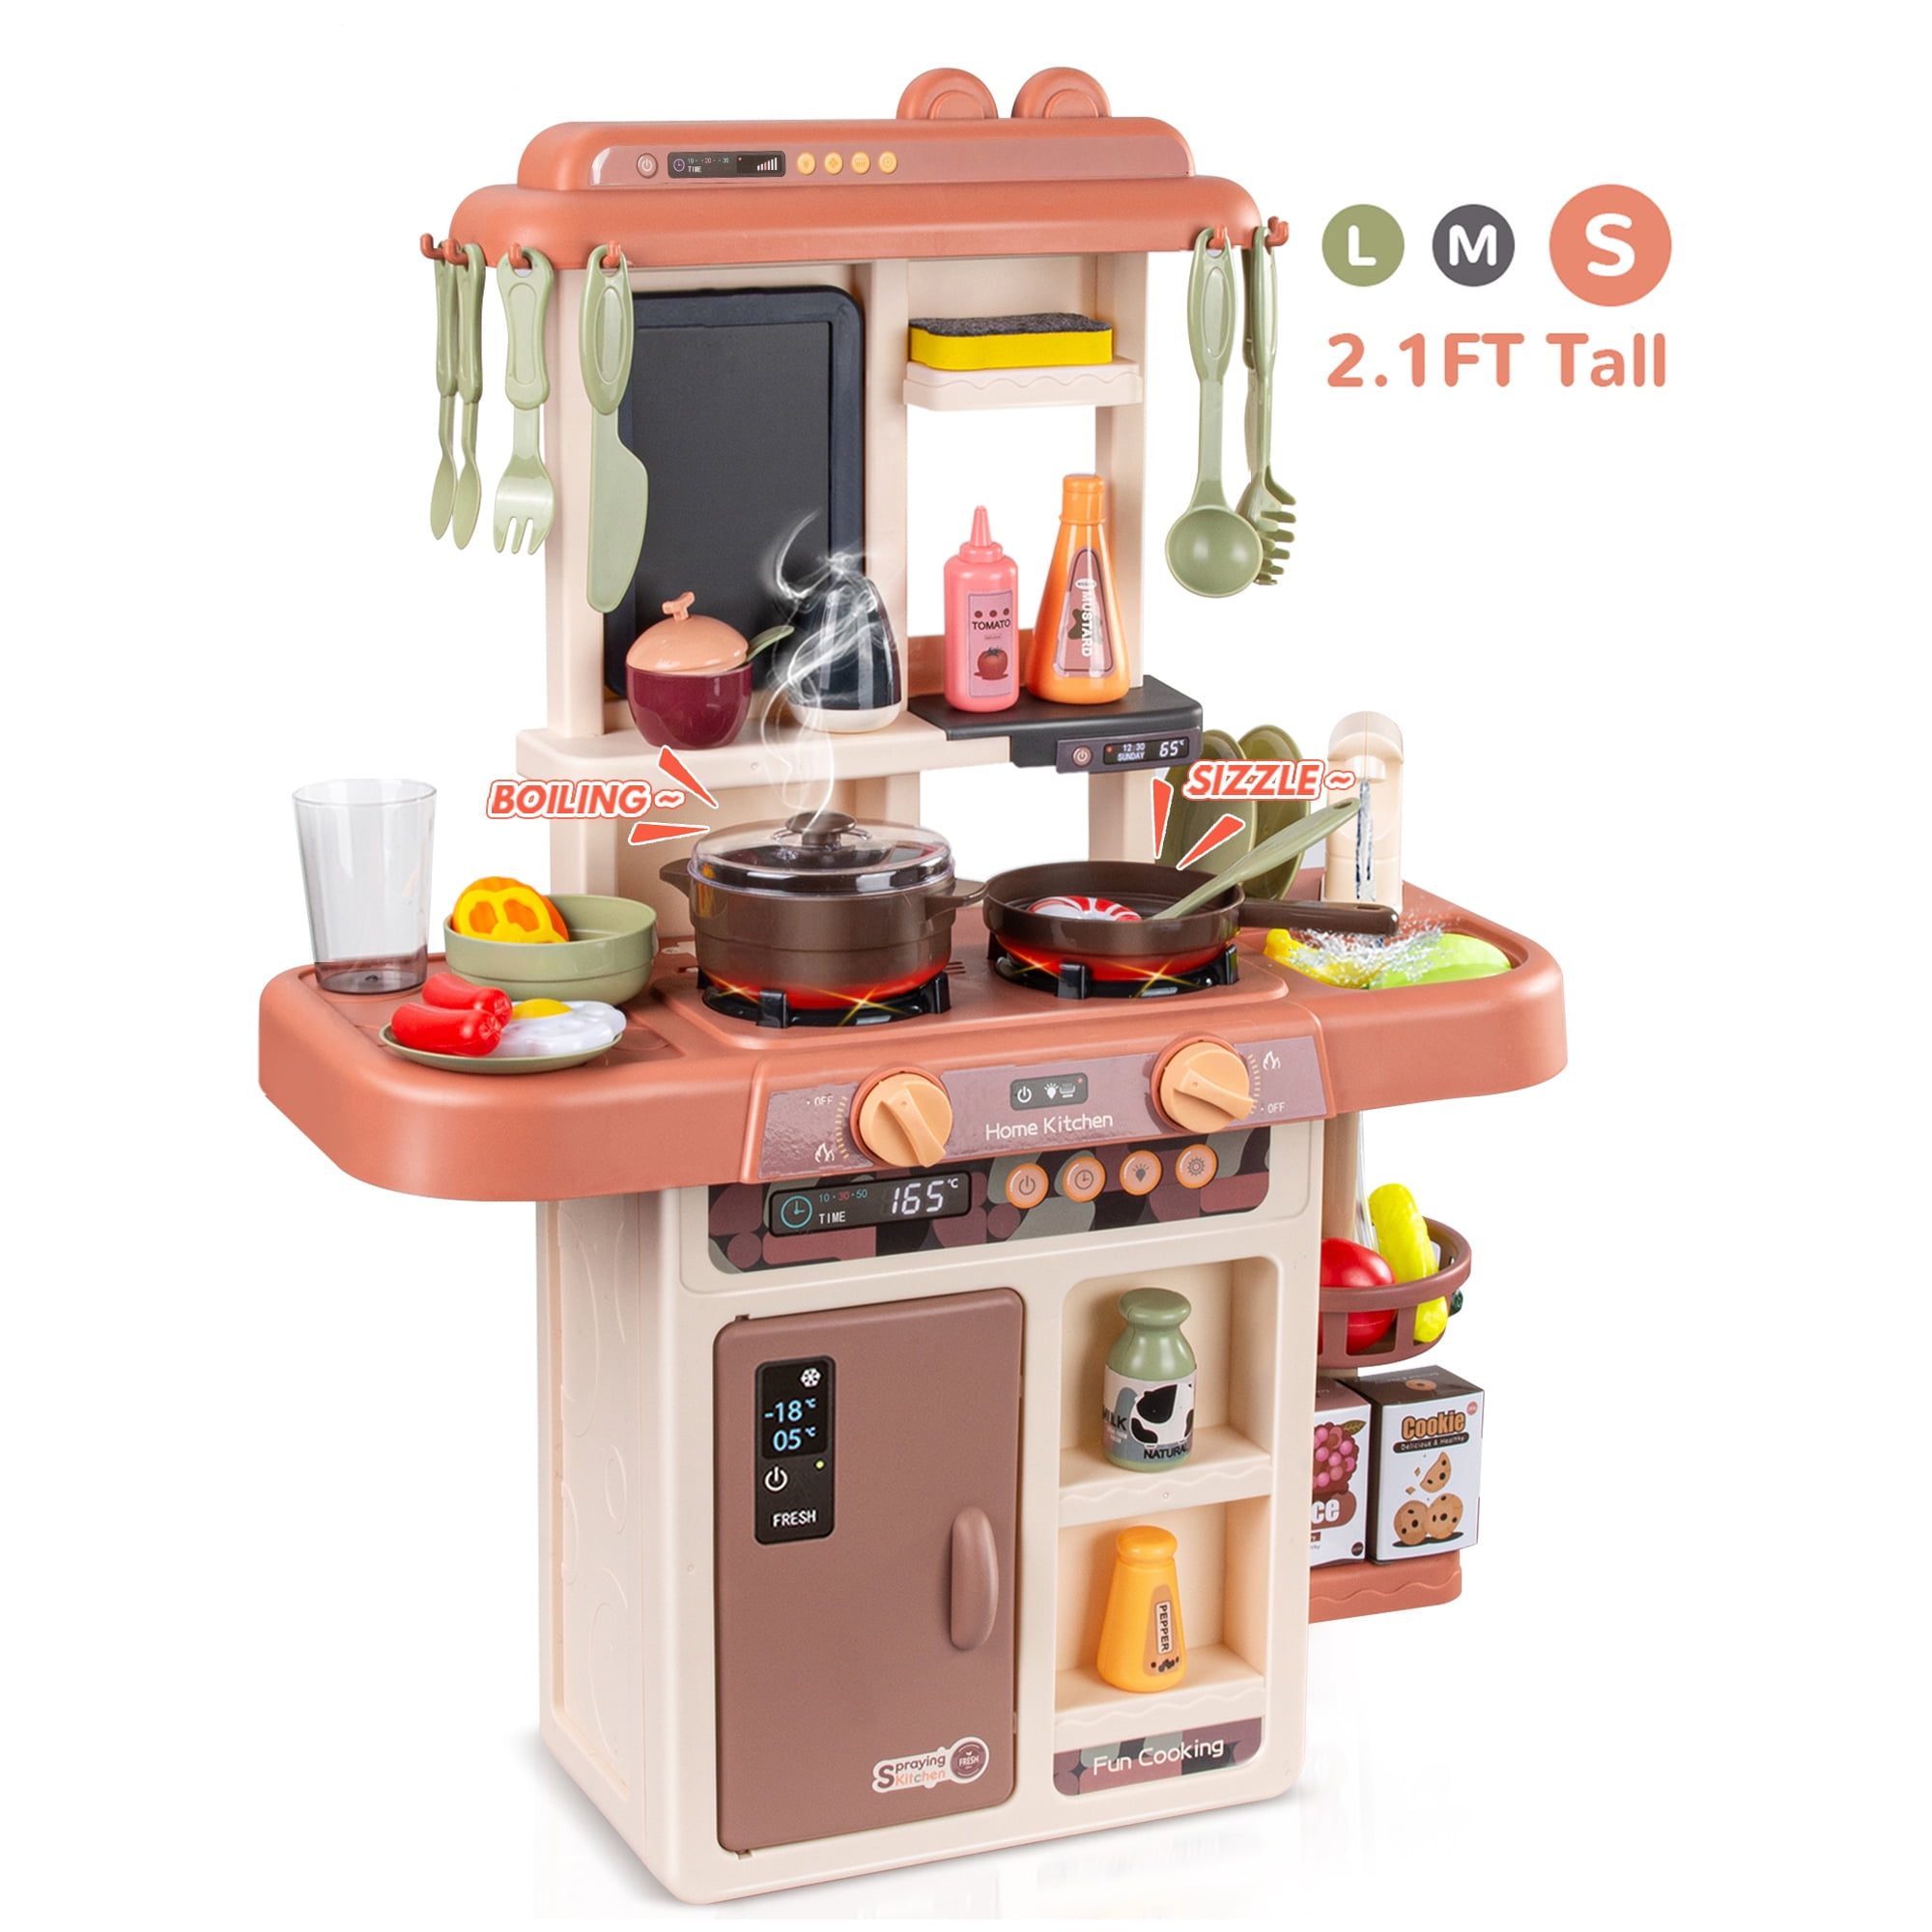 Wisairt 2.1FT Tall Kids Play Kitchen with 42 Piece Toy Kitchen Set